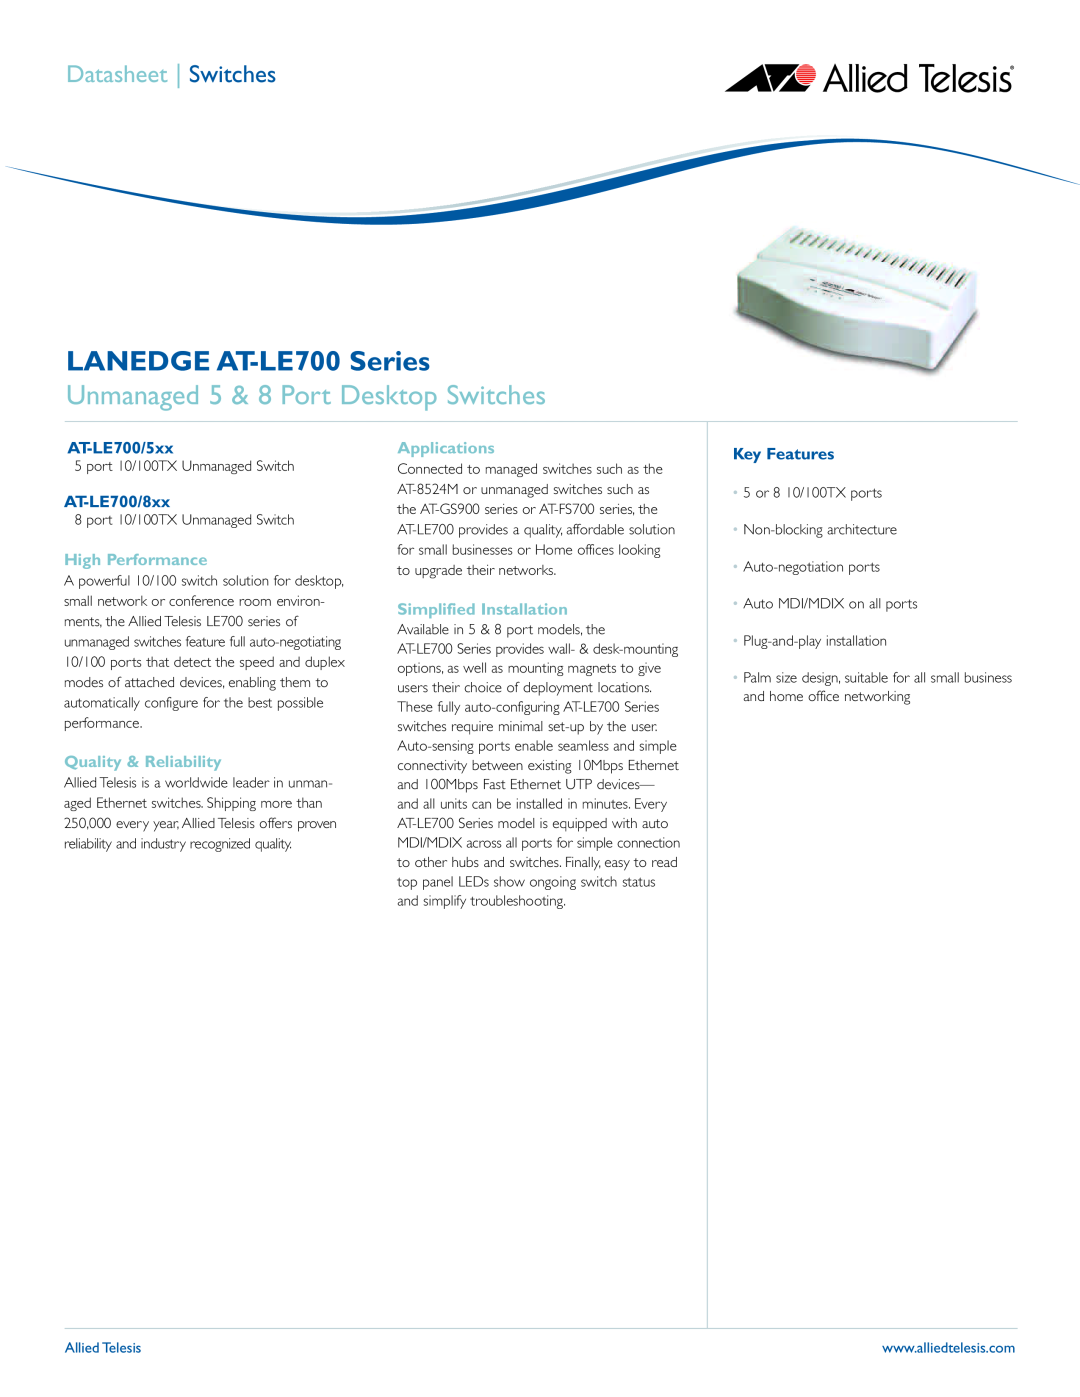 Allied Telesis manual Unmanaged 5 & 8 Port Desktop Switches, AT-LE700/5xx, AT-LE700/8xx, High Performance, Applications 